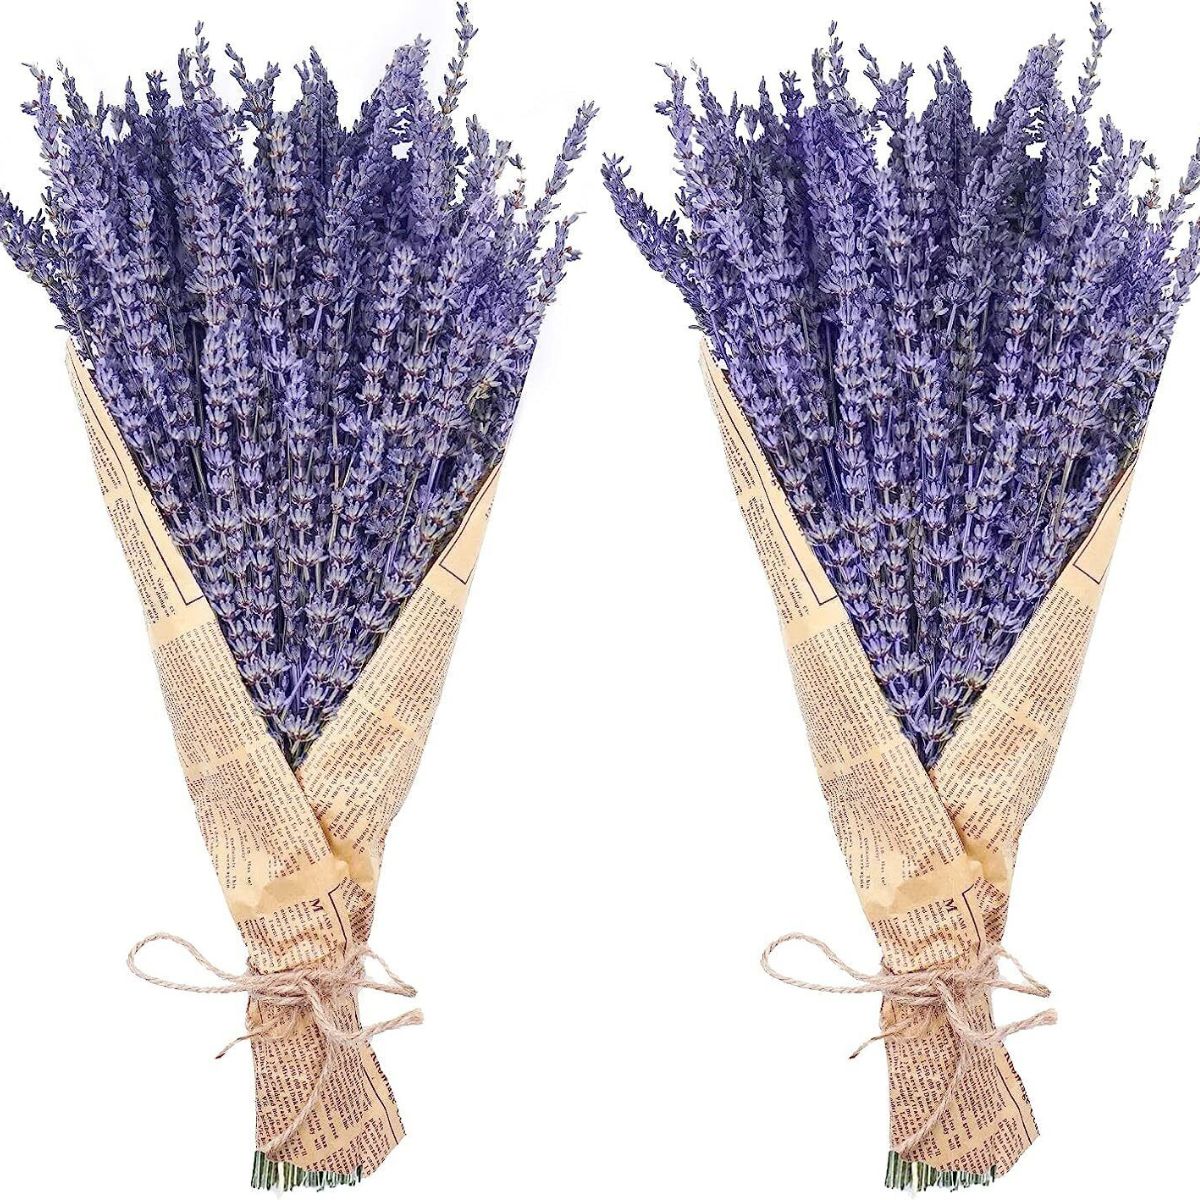 16 Inches Natural Lavender Dried Flowers 2 pcs